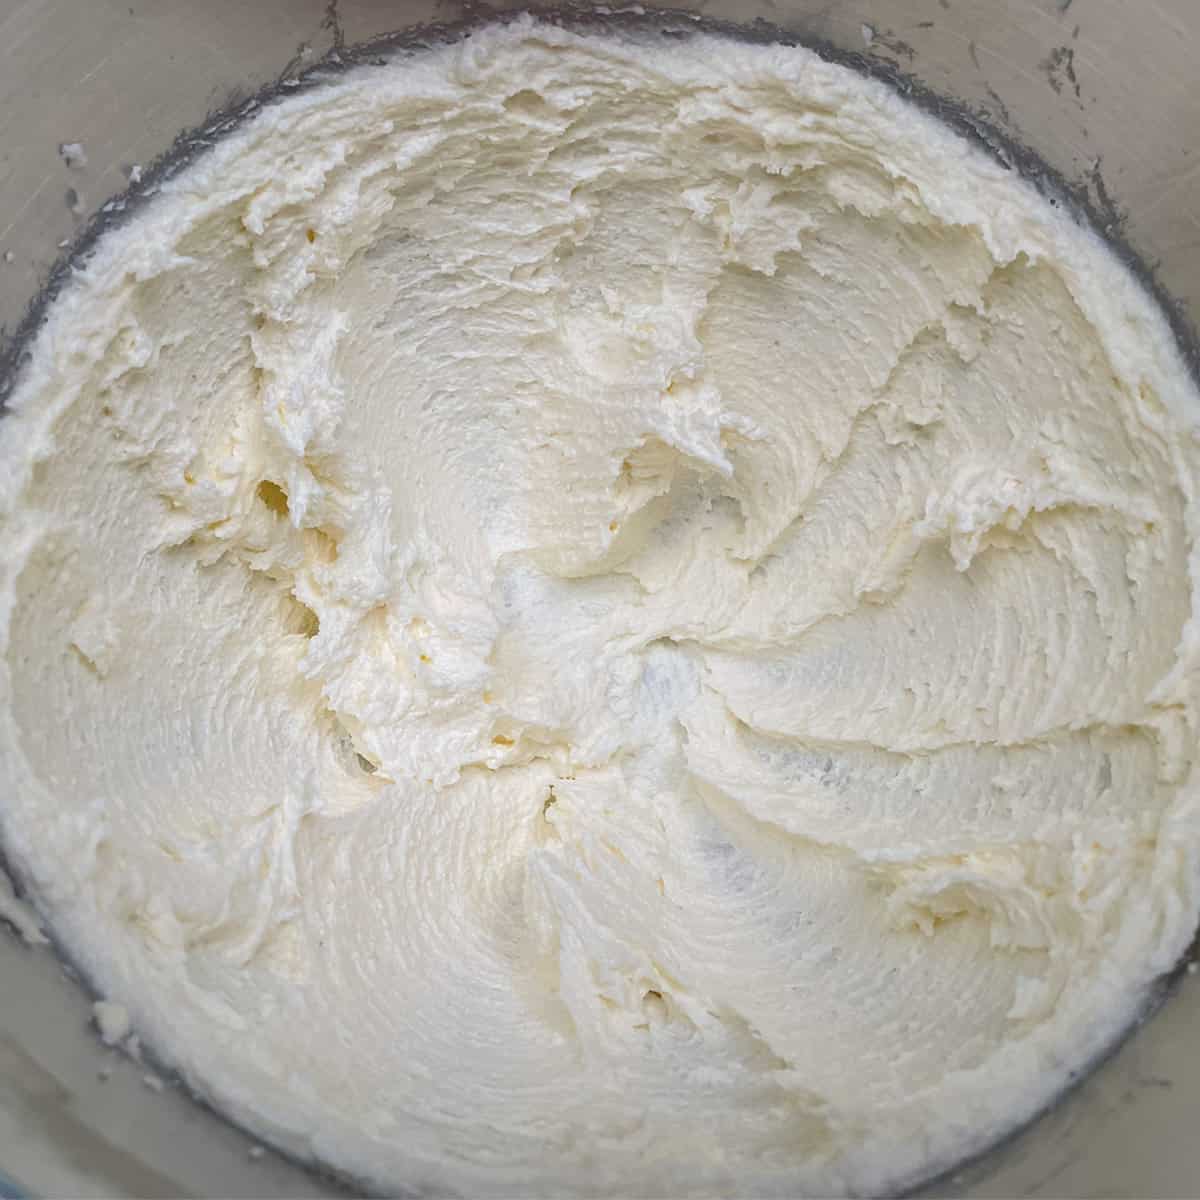 Butter and sugar mixed after three minutes, and it looks whipped and creamy.